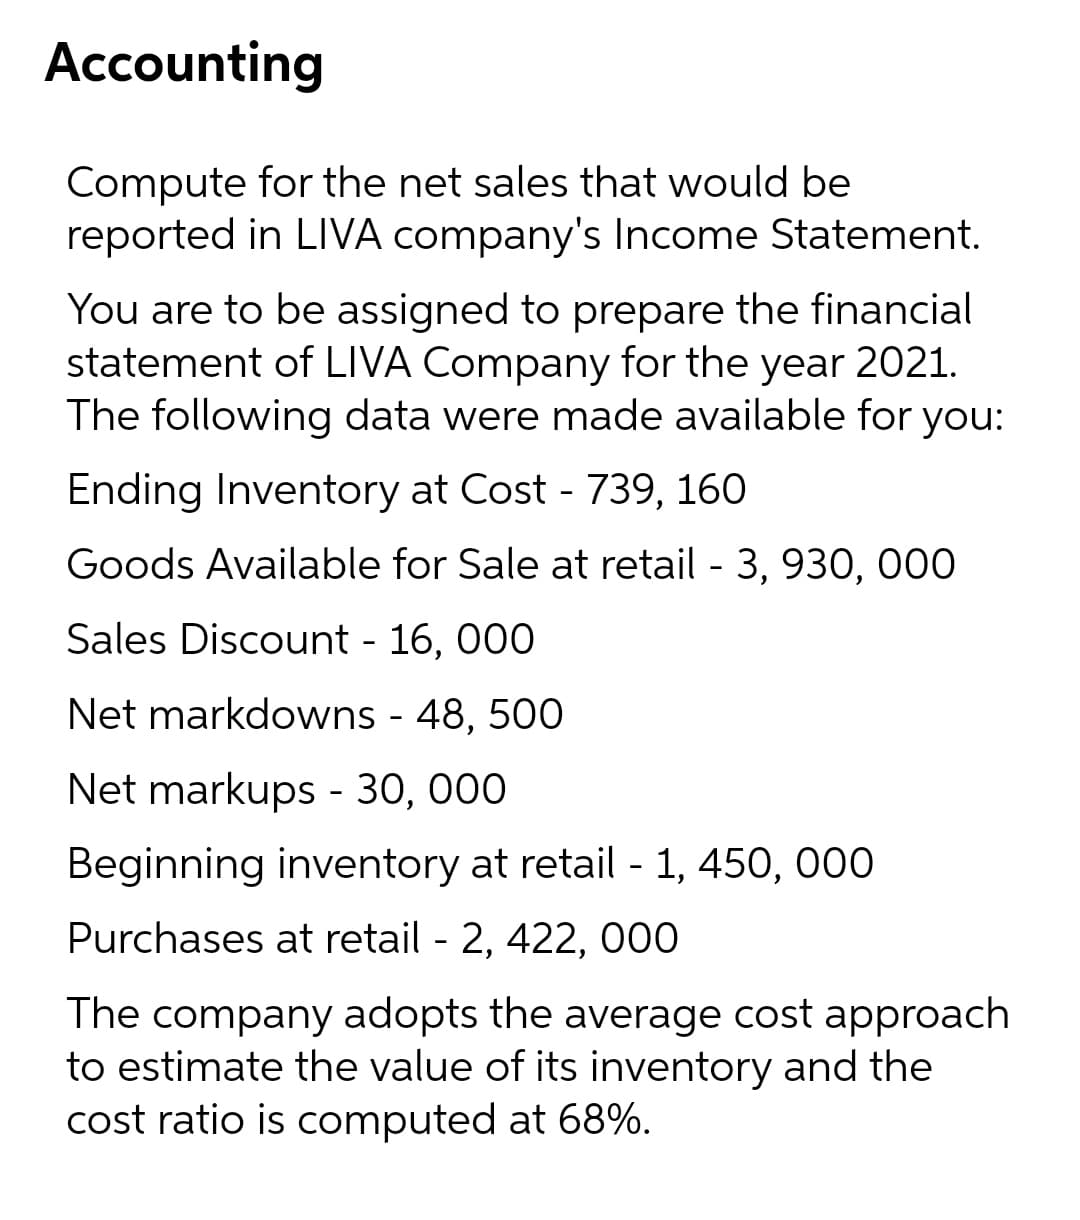 Accounting
Compute for the net sales that would be
reported in LIVA company's Income Statement.
You are to be assigned to prepare the financial
statement of LIVA Company for the year 2021.
The following data were made available for you:
Ending Inventory at Cost - 739, 160
Goods Available for Sale at retail - 3, 930, 000
Sales Discount - 16, 000
Net markdowns - 48, 500
Net markups - 30, 000
Beginning inventory at retail - 1, 450, 000
Purchases at retail - 2, 422, 000
The company adopts the average cost approach
to estimate the value of its inventory and the
cost ratio is computed at 68%.
